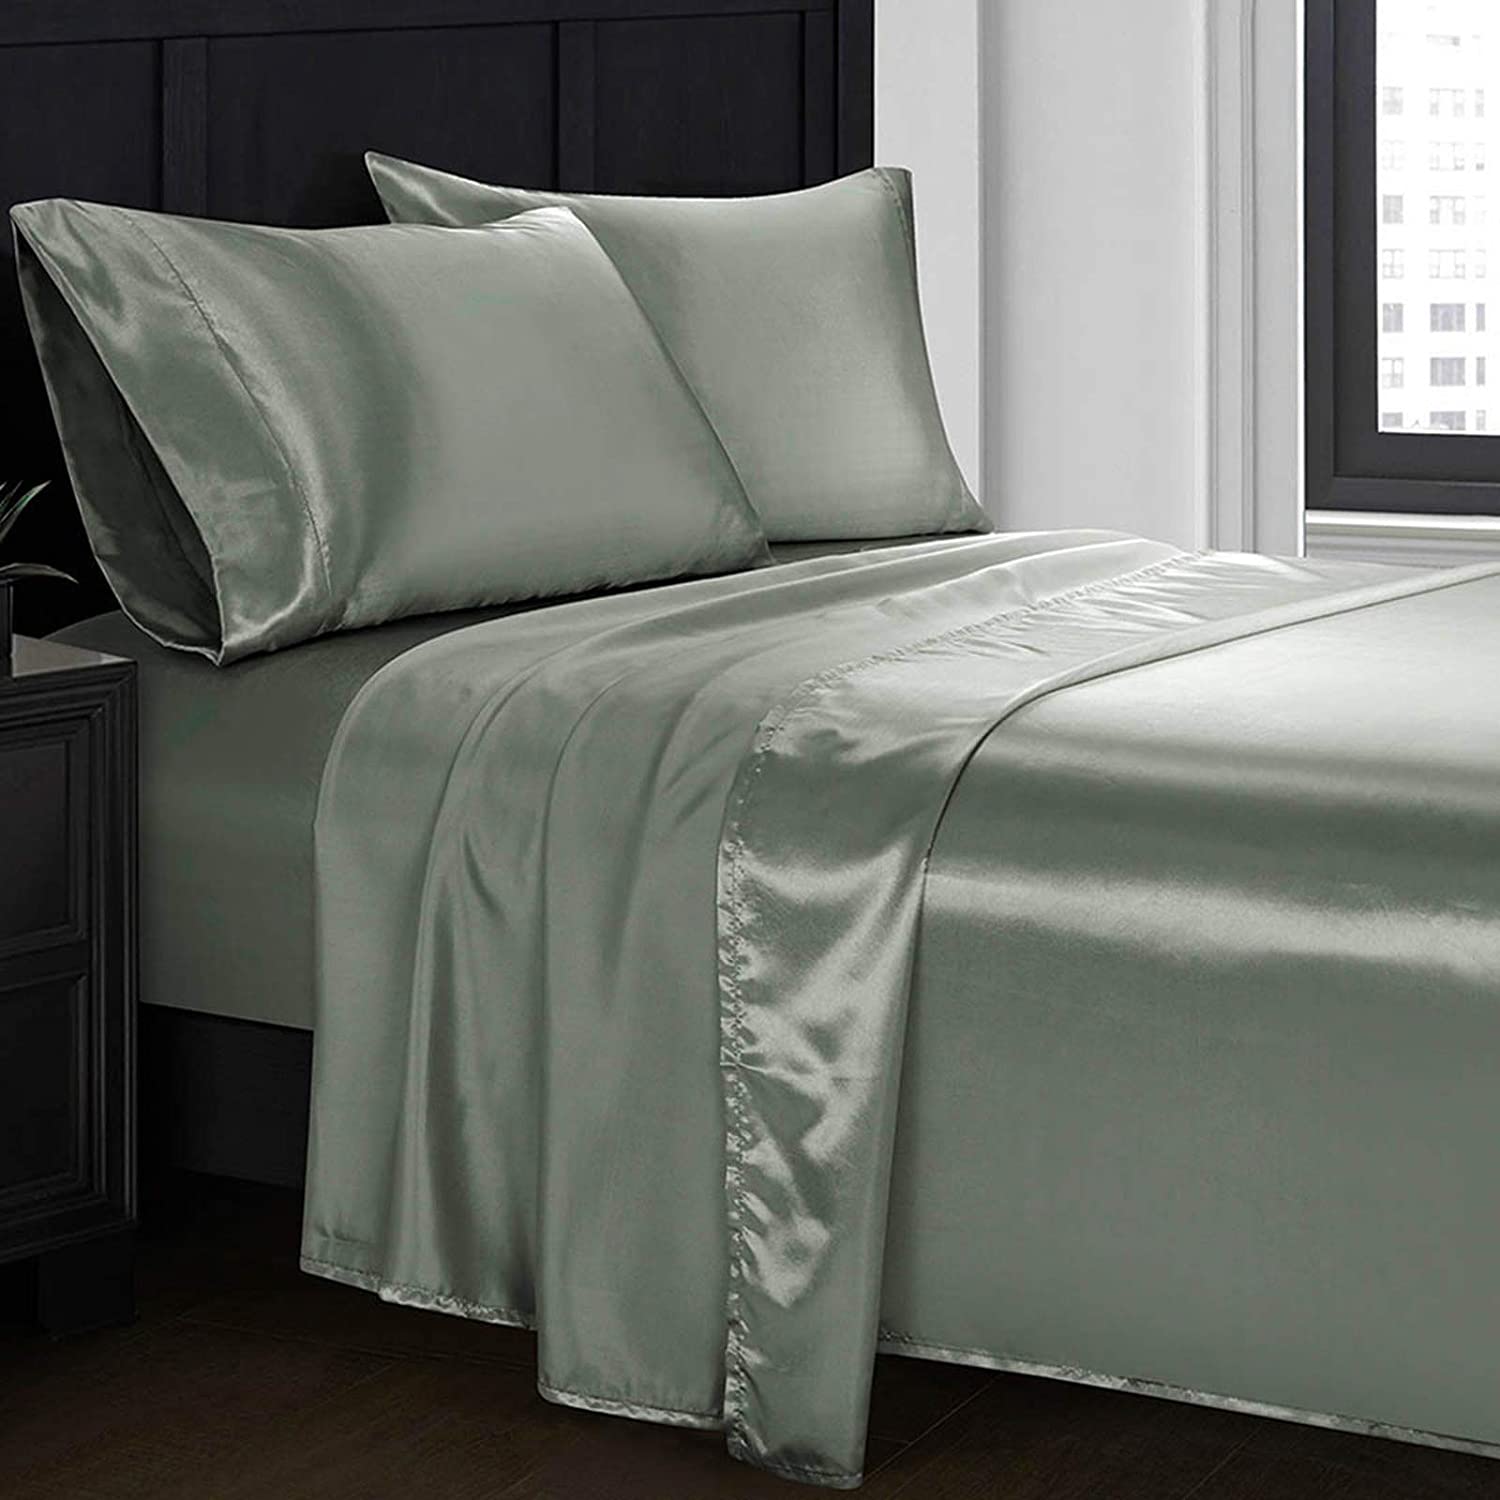 Free Fitte Details about   HollyHOME Silky Soft Luxury 4 Piece Deep Pocket Full Satin Sheet Set 